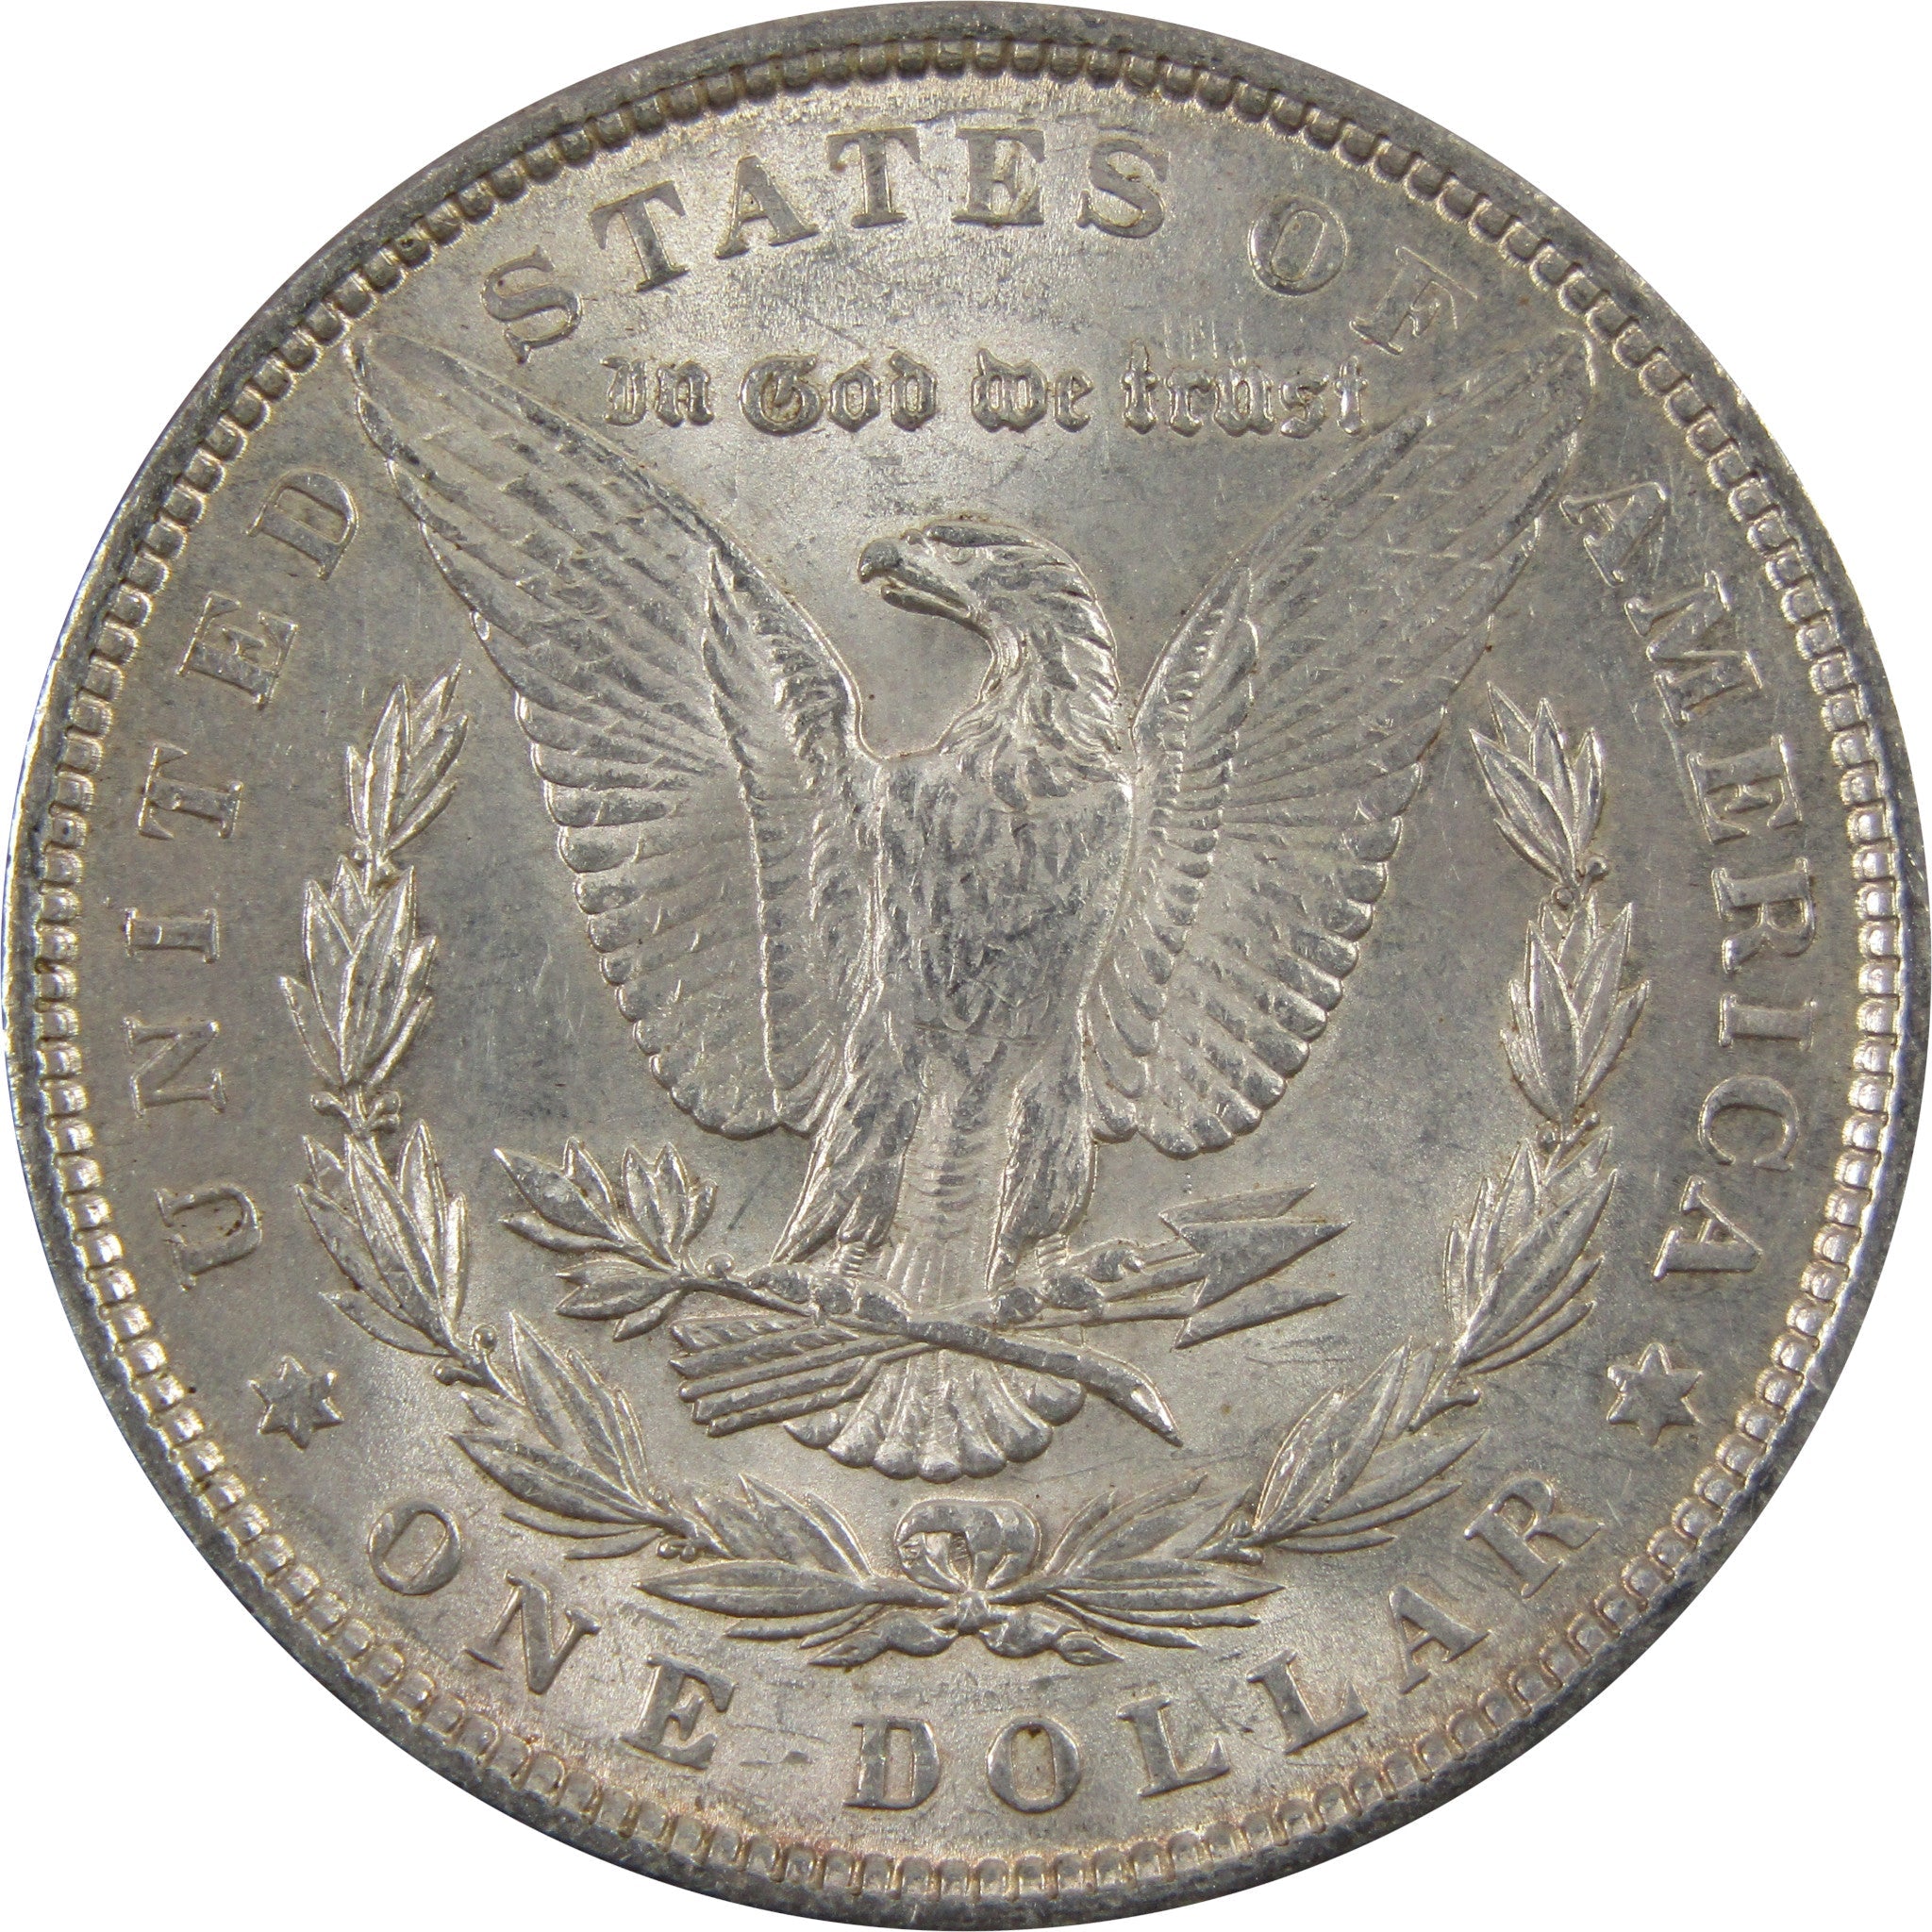 1889 Morgan Dollar AU About Uncirculated 90% Silver $1 Coin SKU:I5497 - Morgan coin - Morgan silver dollar - Morgan silver dollar for sale - Profile Coins &amp; Collectibles